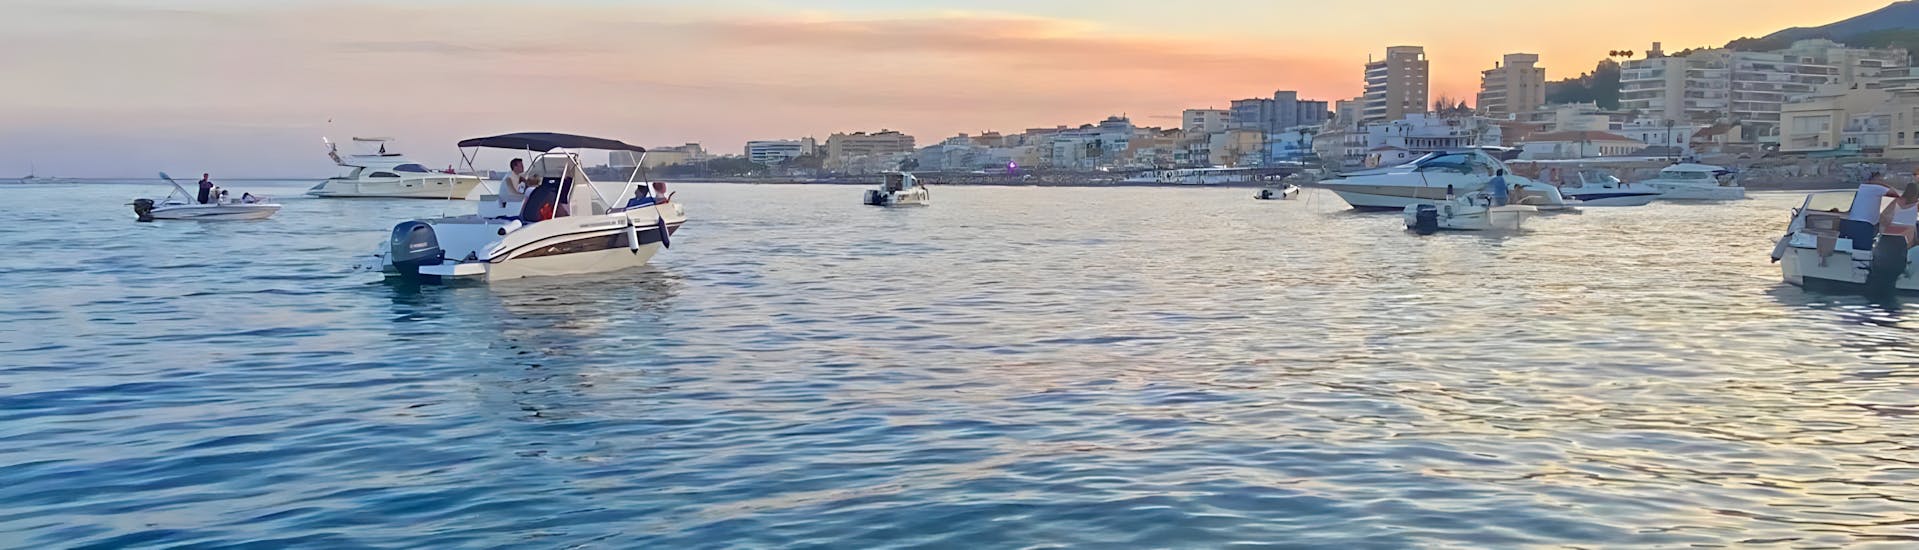 Sunset in the harbour of Bnealmádena where you will find Oceanautic Benalmádena's licensed charter boats for up to 7 people.